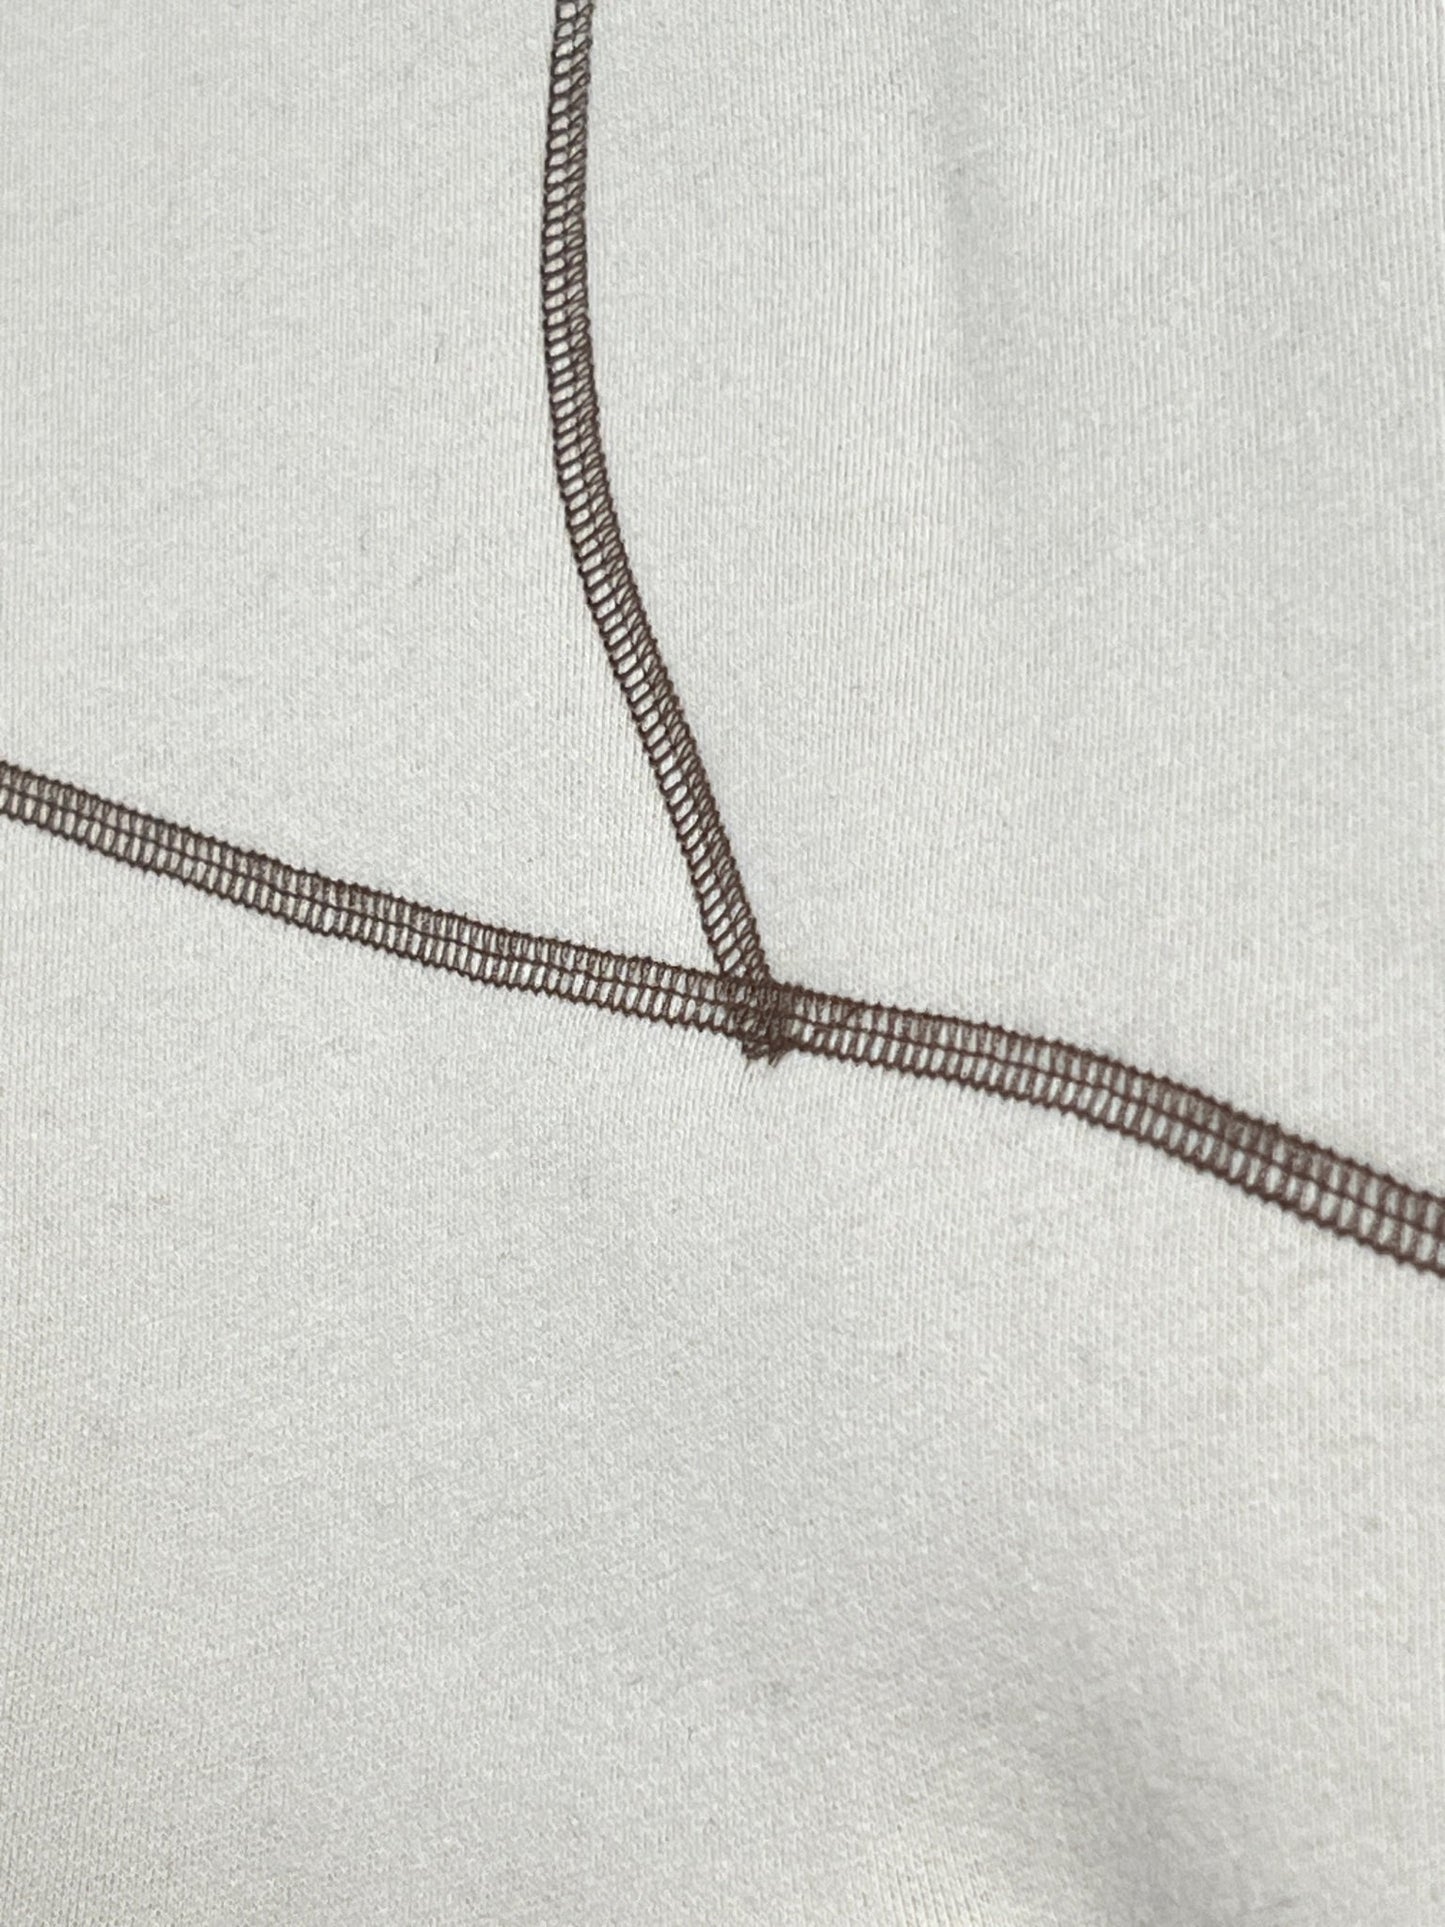 A close up of an ultra-soft PLEASURES VEIN HOODIE TAN with brown threads.